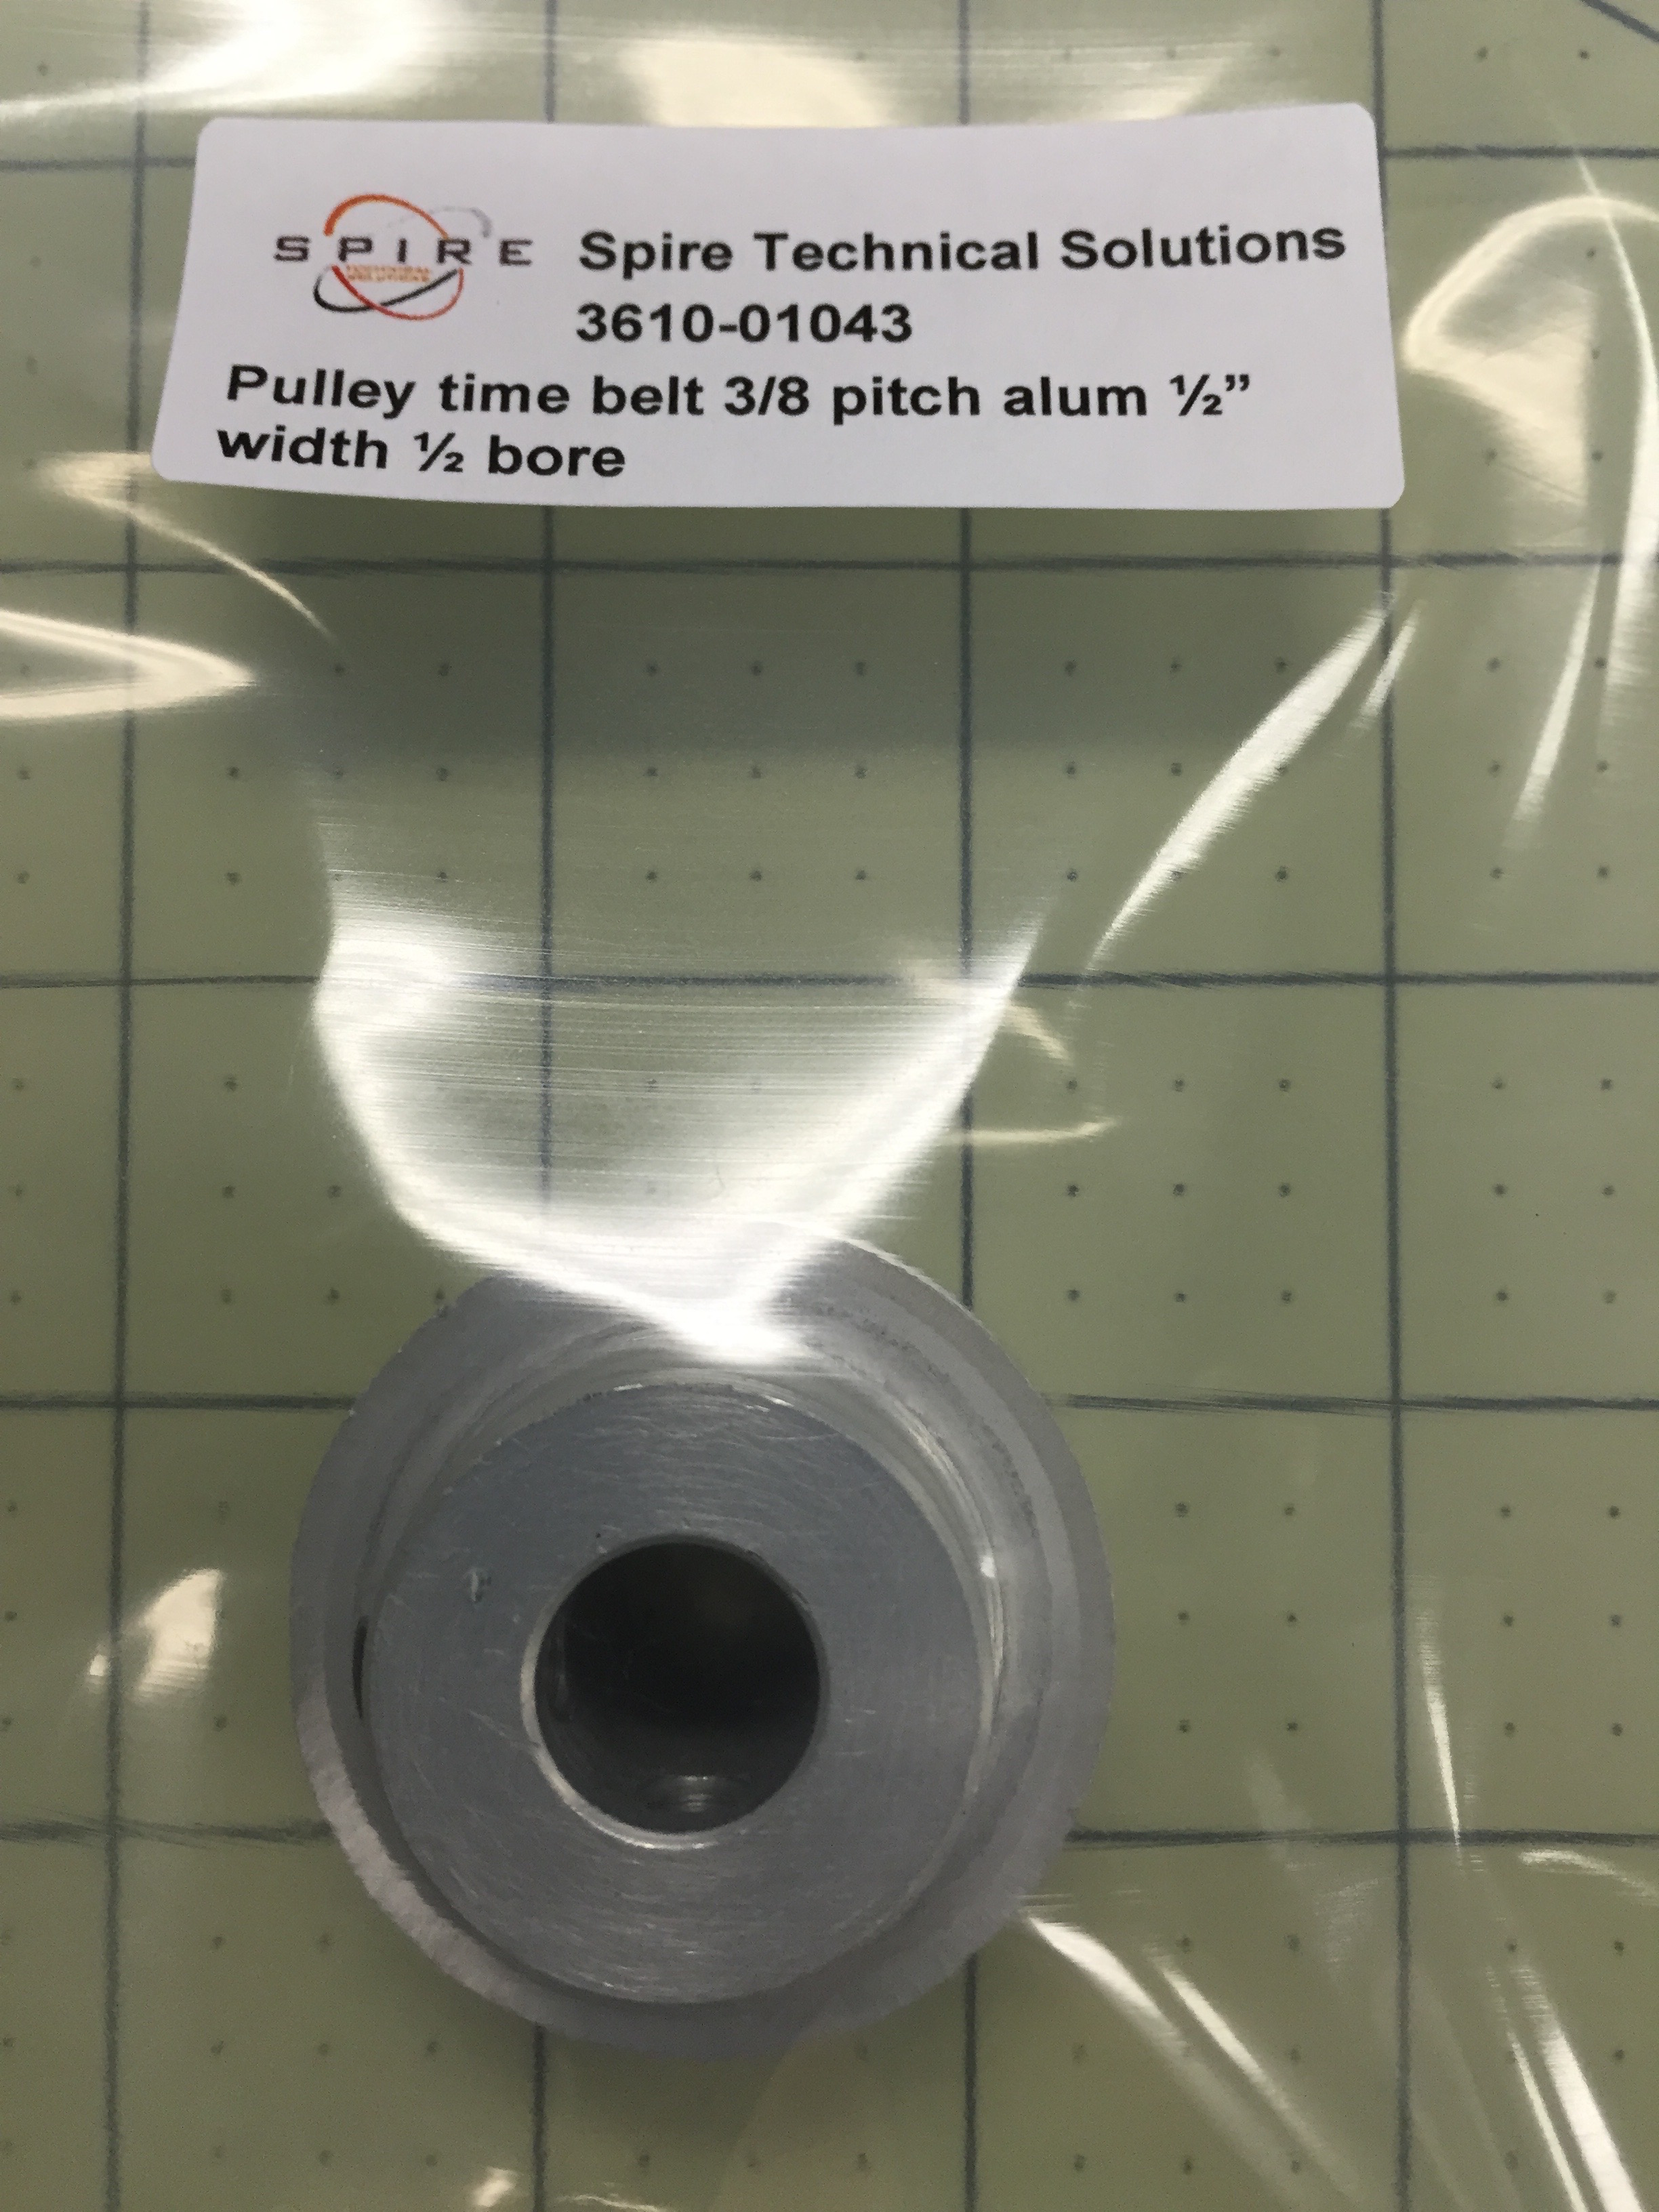 Pulley time belt 3/8 pitch alum ½” width ½ bore